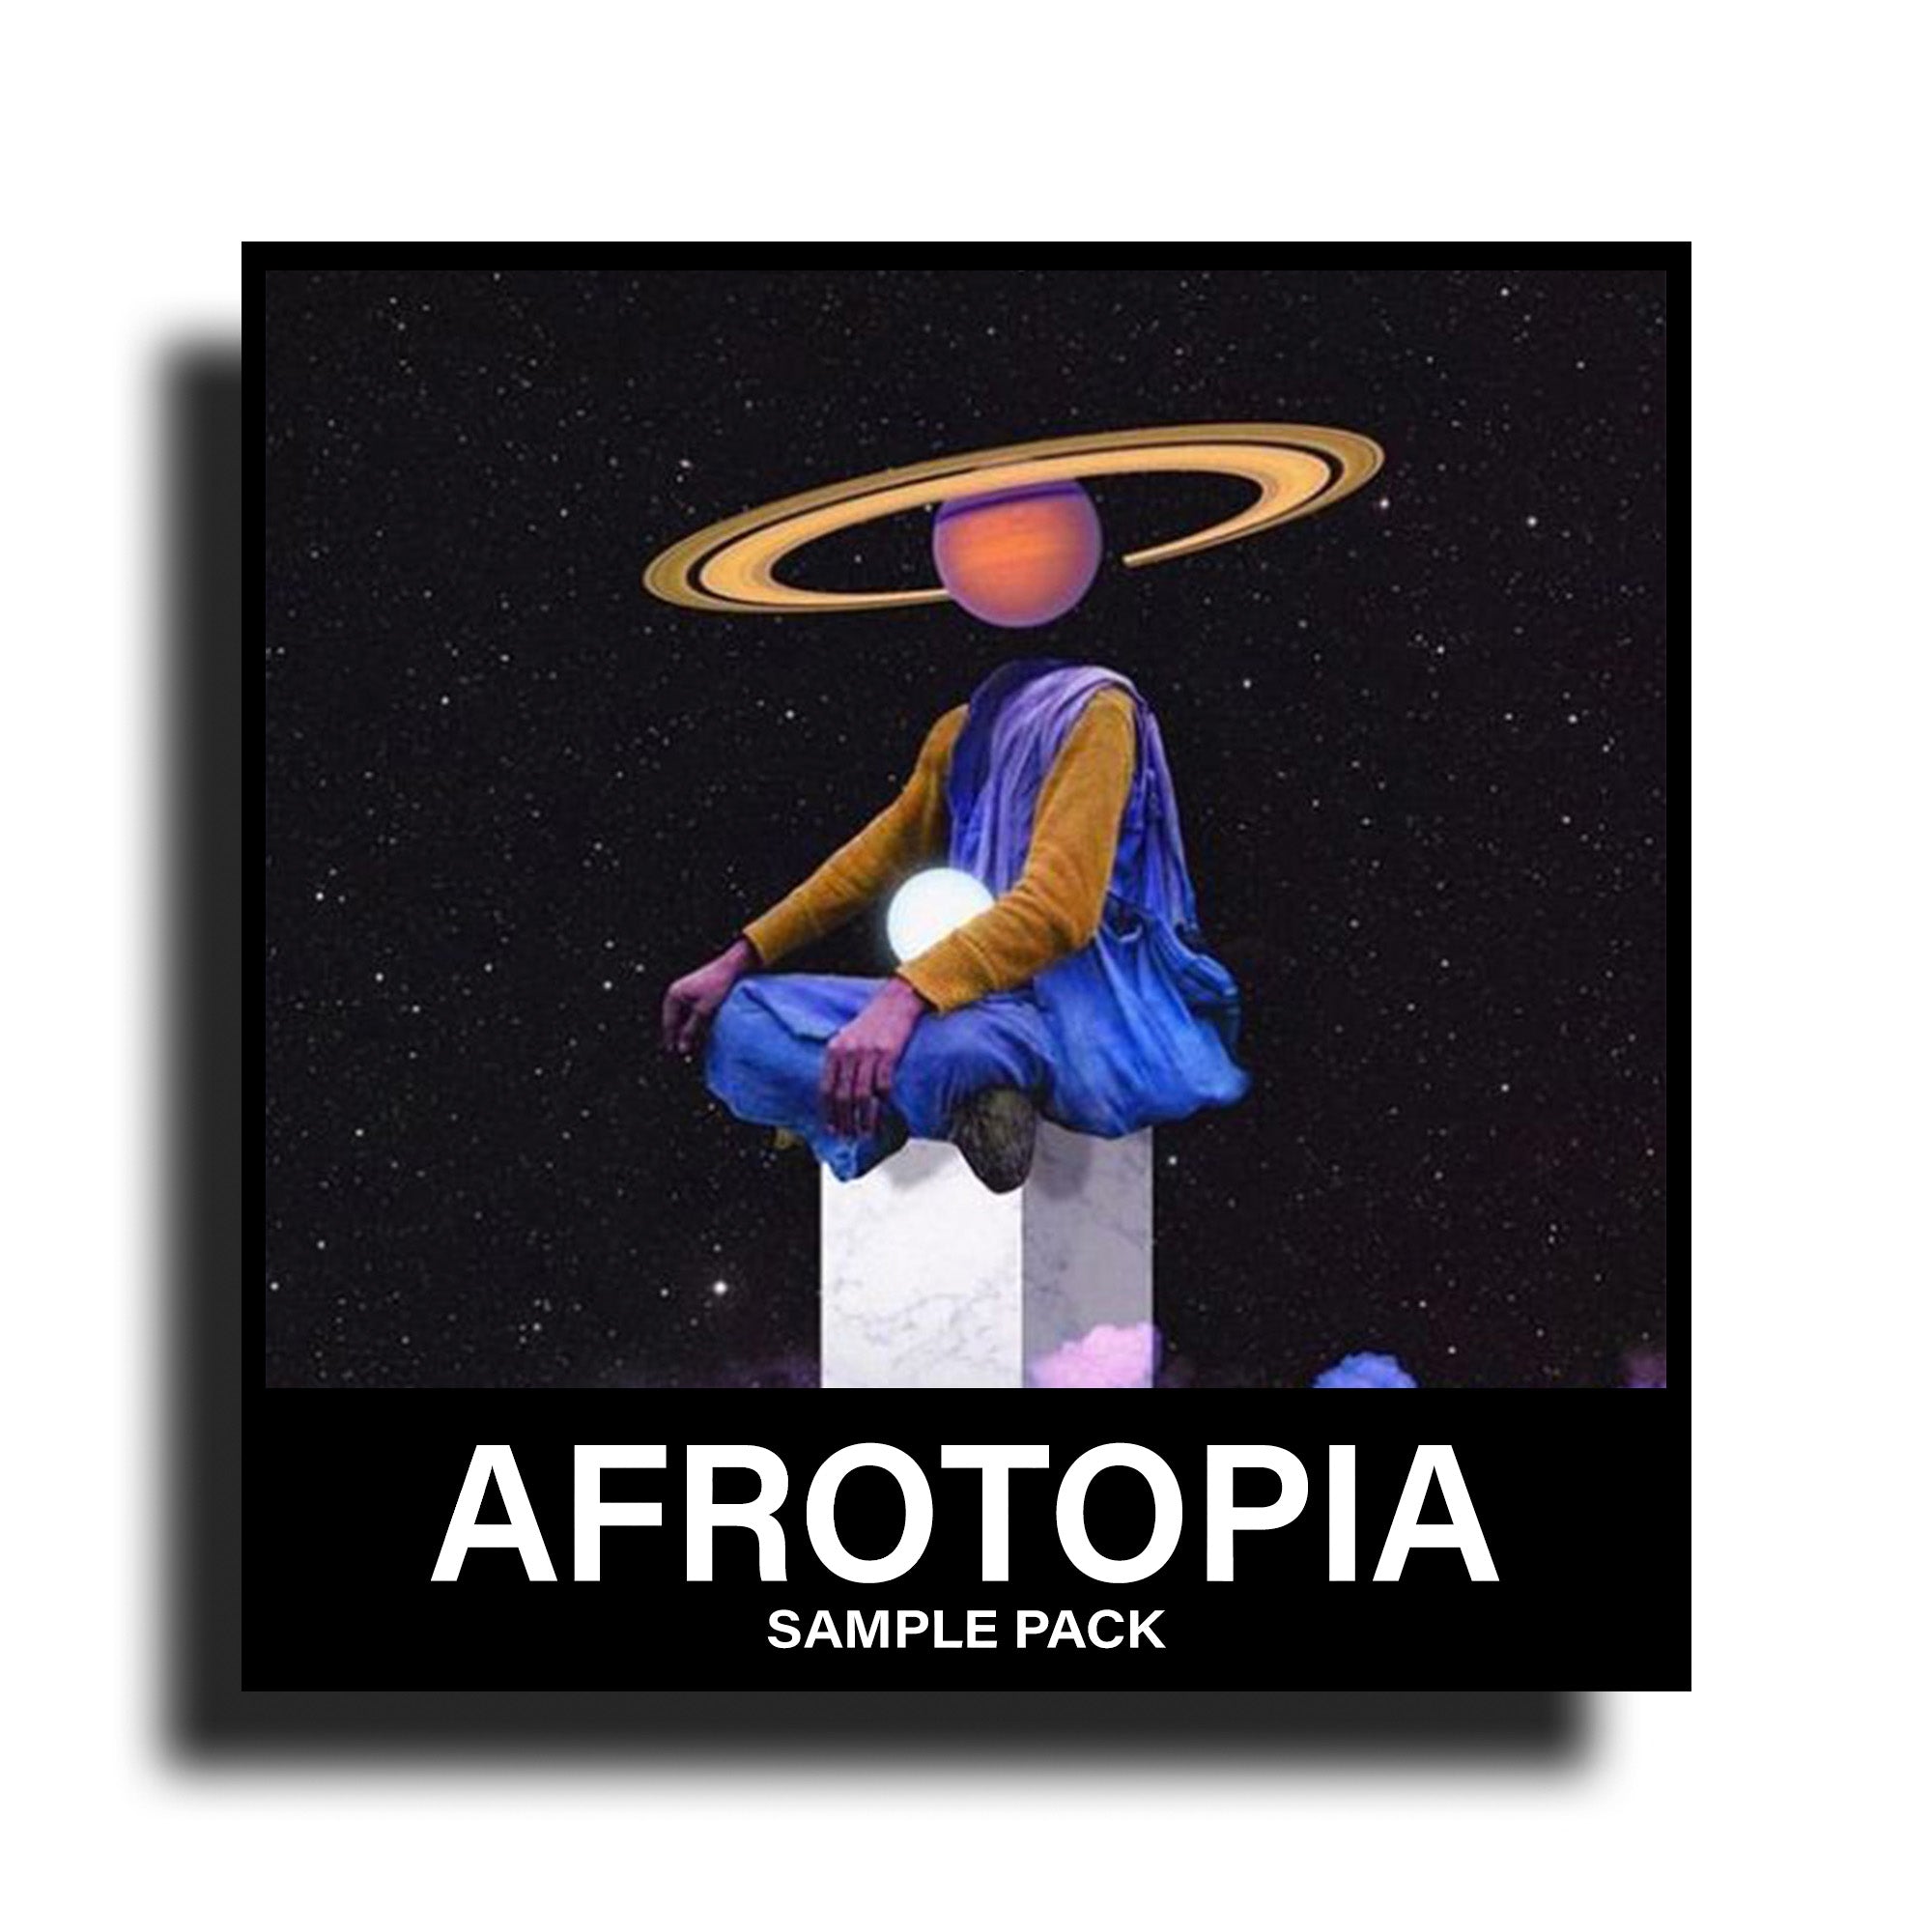 AFROTOPIA Sample Pack